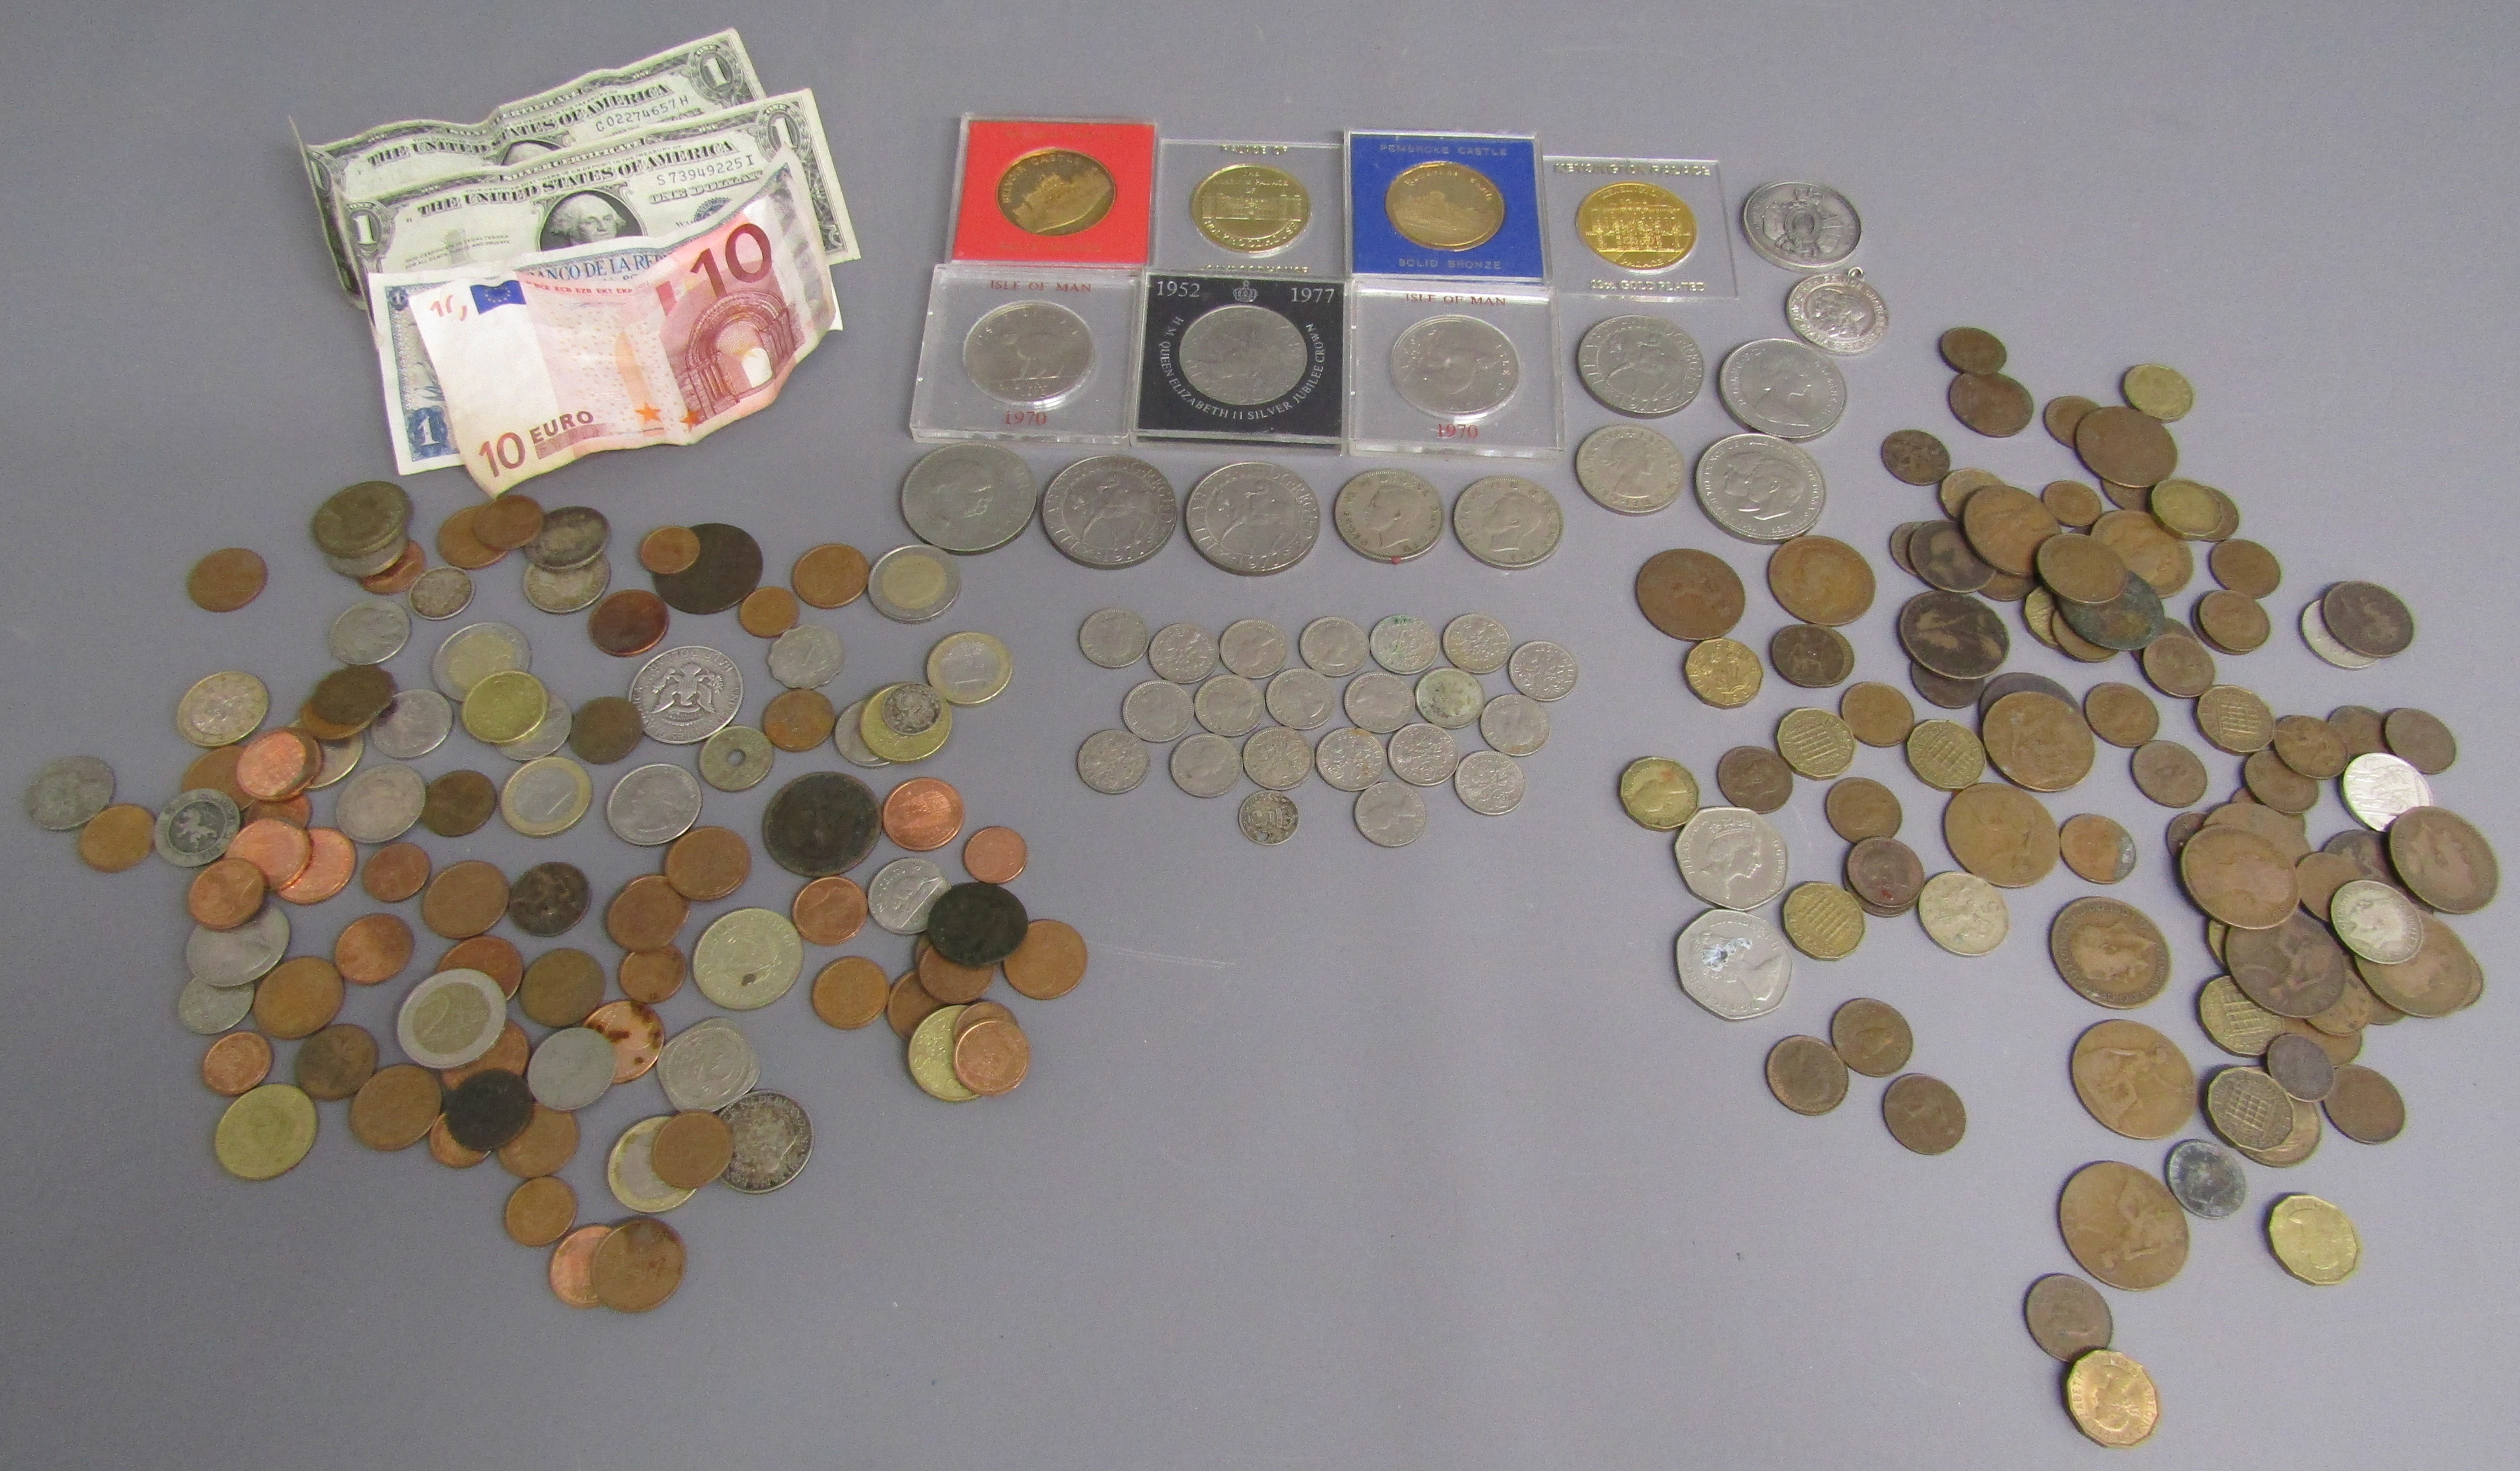 Collection of coins includes English and Foreign, 1 dollar bill, 10 Euro note, 1964 half dollar,